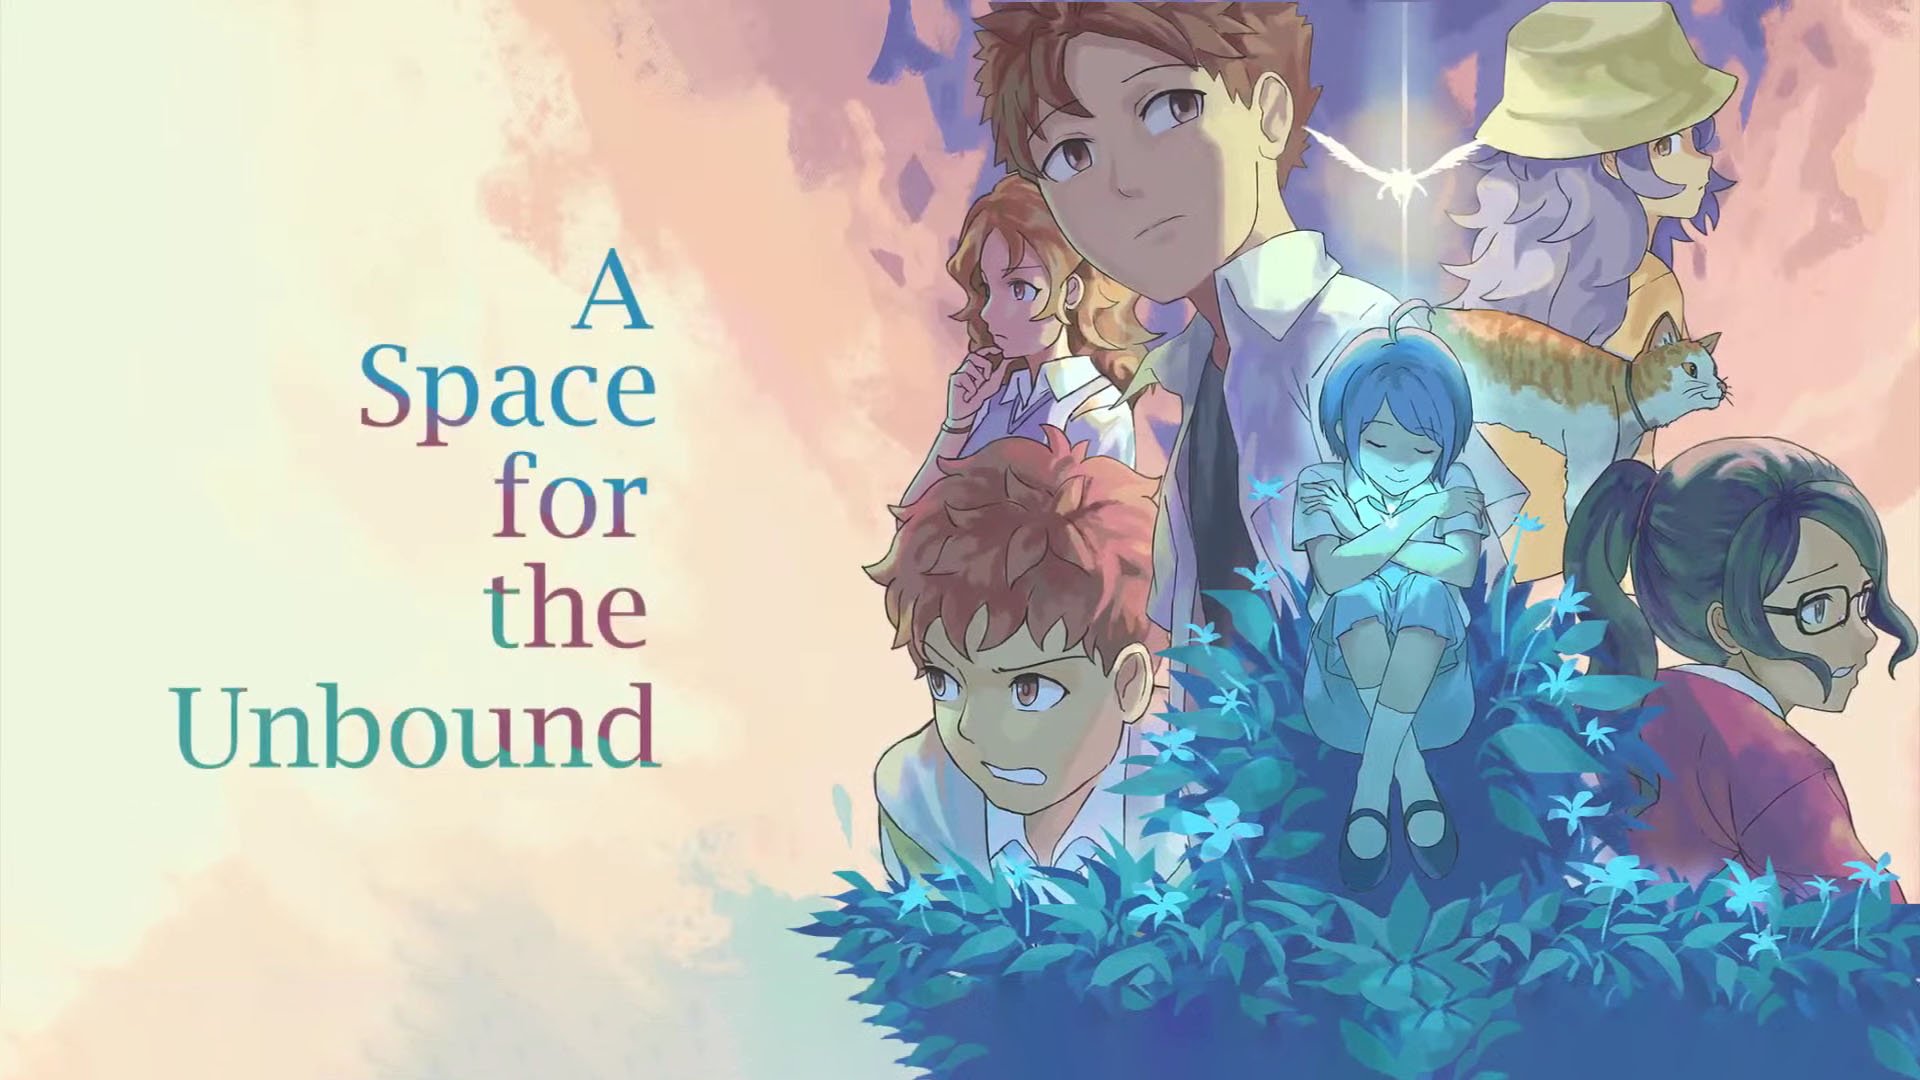 A Space for the Unbound launches January 19, 2023 - Gematsu